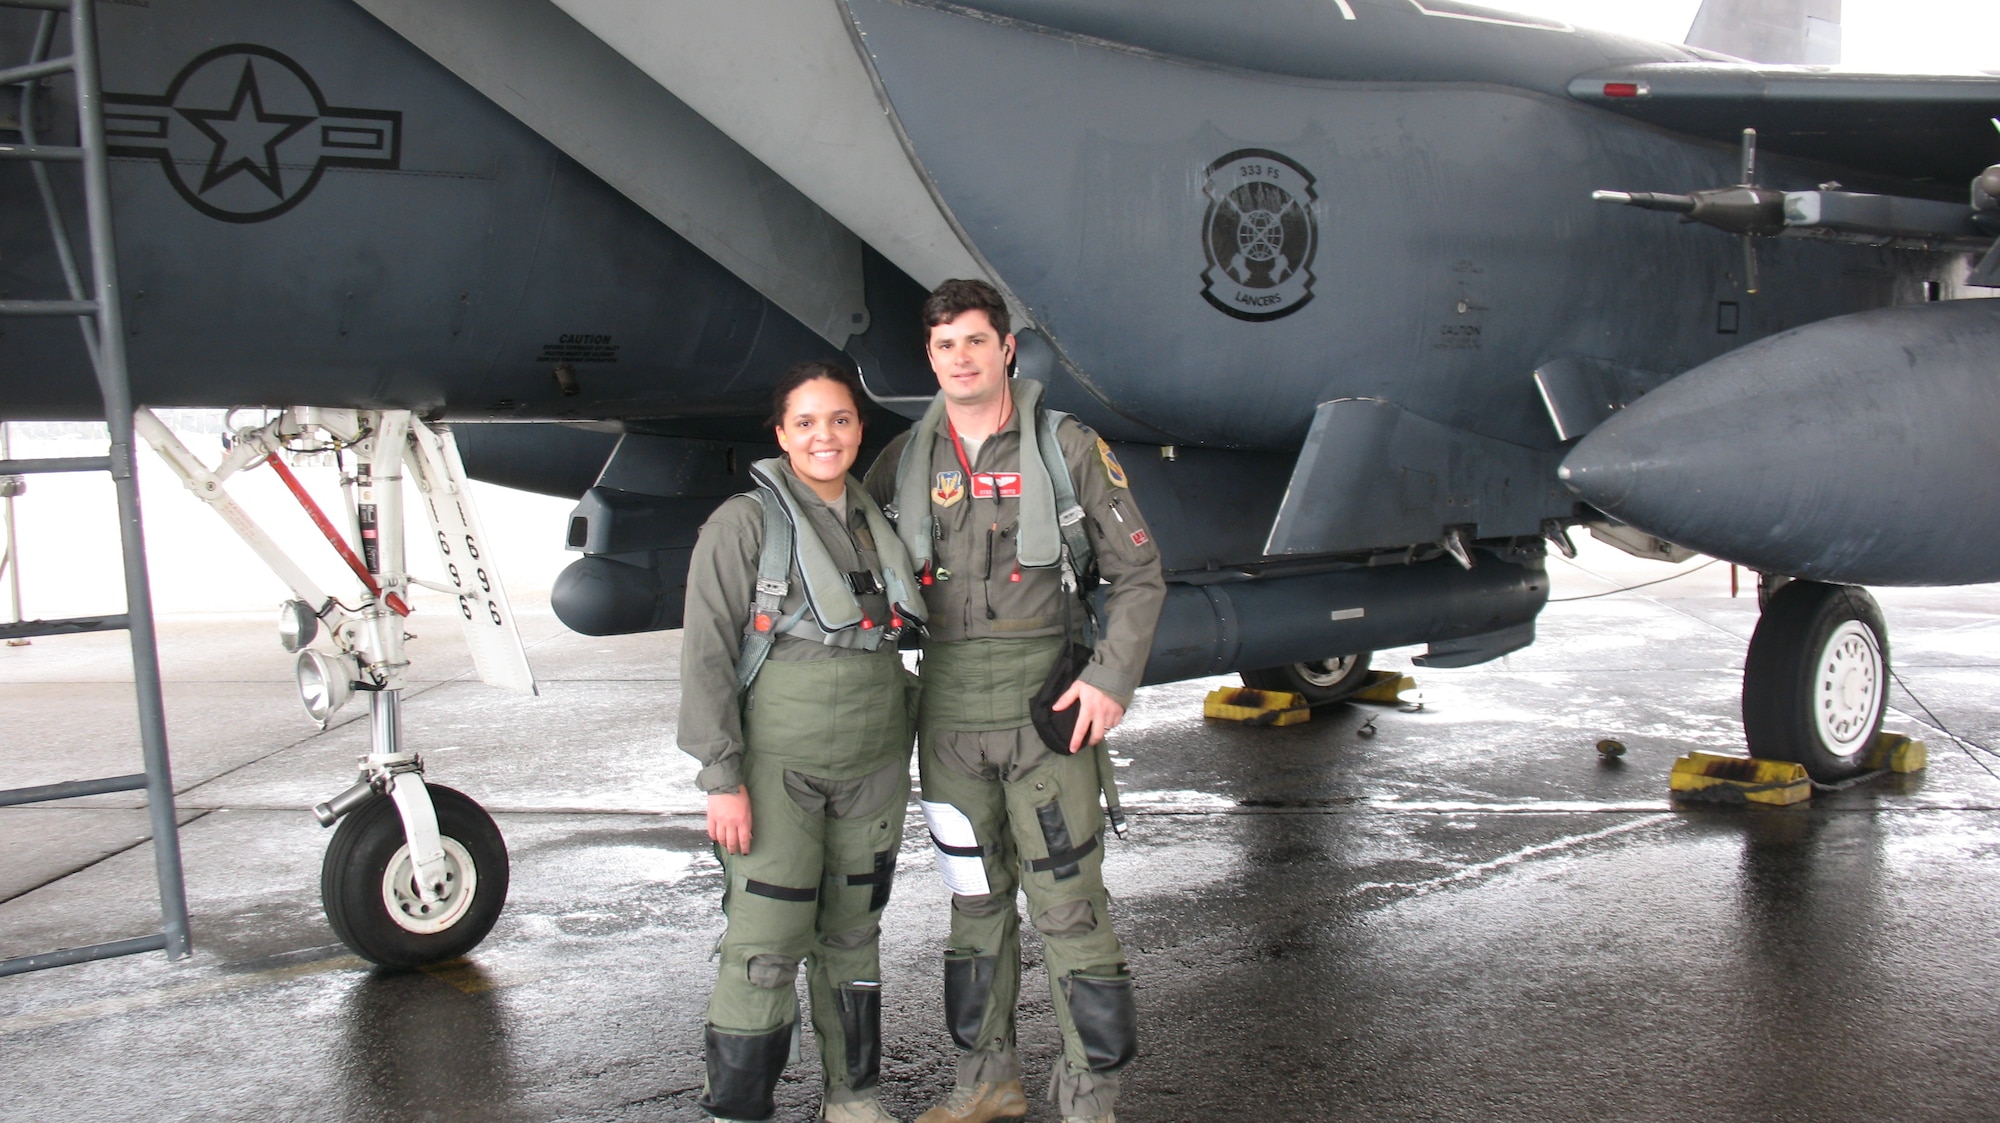 Senior Airman McKayla Dejohnette, 26th Operational Weather Squadron (OWS) weather forecaster, and Capt. Jon Koritz, a 333rd Fighter Squadron F-15E pilot, stand in front of an F-15E Strike Eagle aircraft at Seymour Johnson Air Force Base, North Carolina, Feb. 21, 2019. Dejohnette was one of two 26th OWS Airmen to receive a familiarization flight aboard two F-15E Strike Eagles to see firsthand how their weather products affect the fighters’ mission. (Courtesy photo)